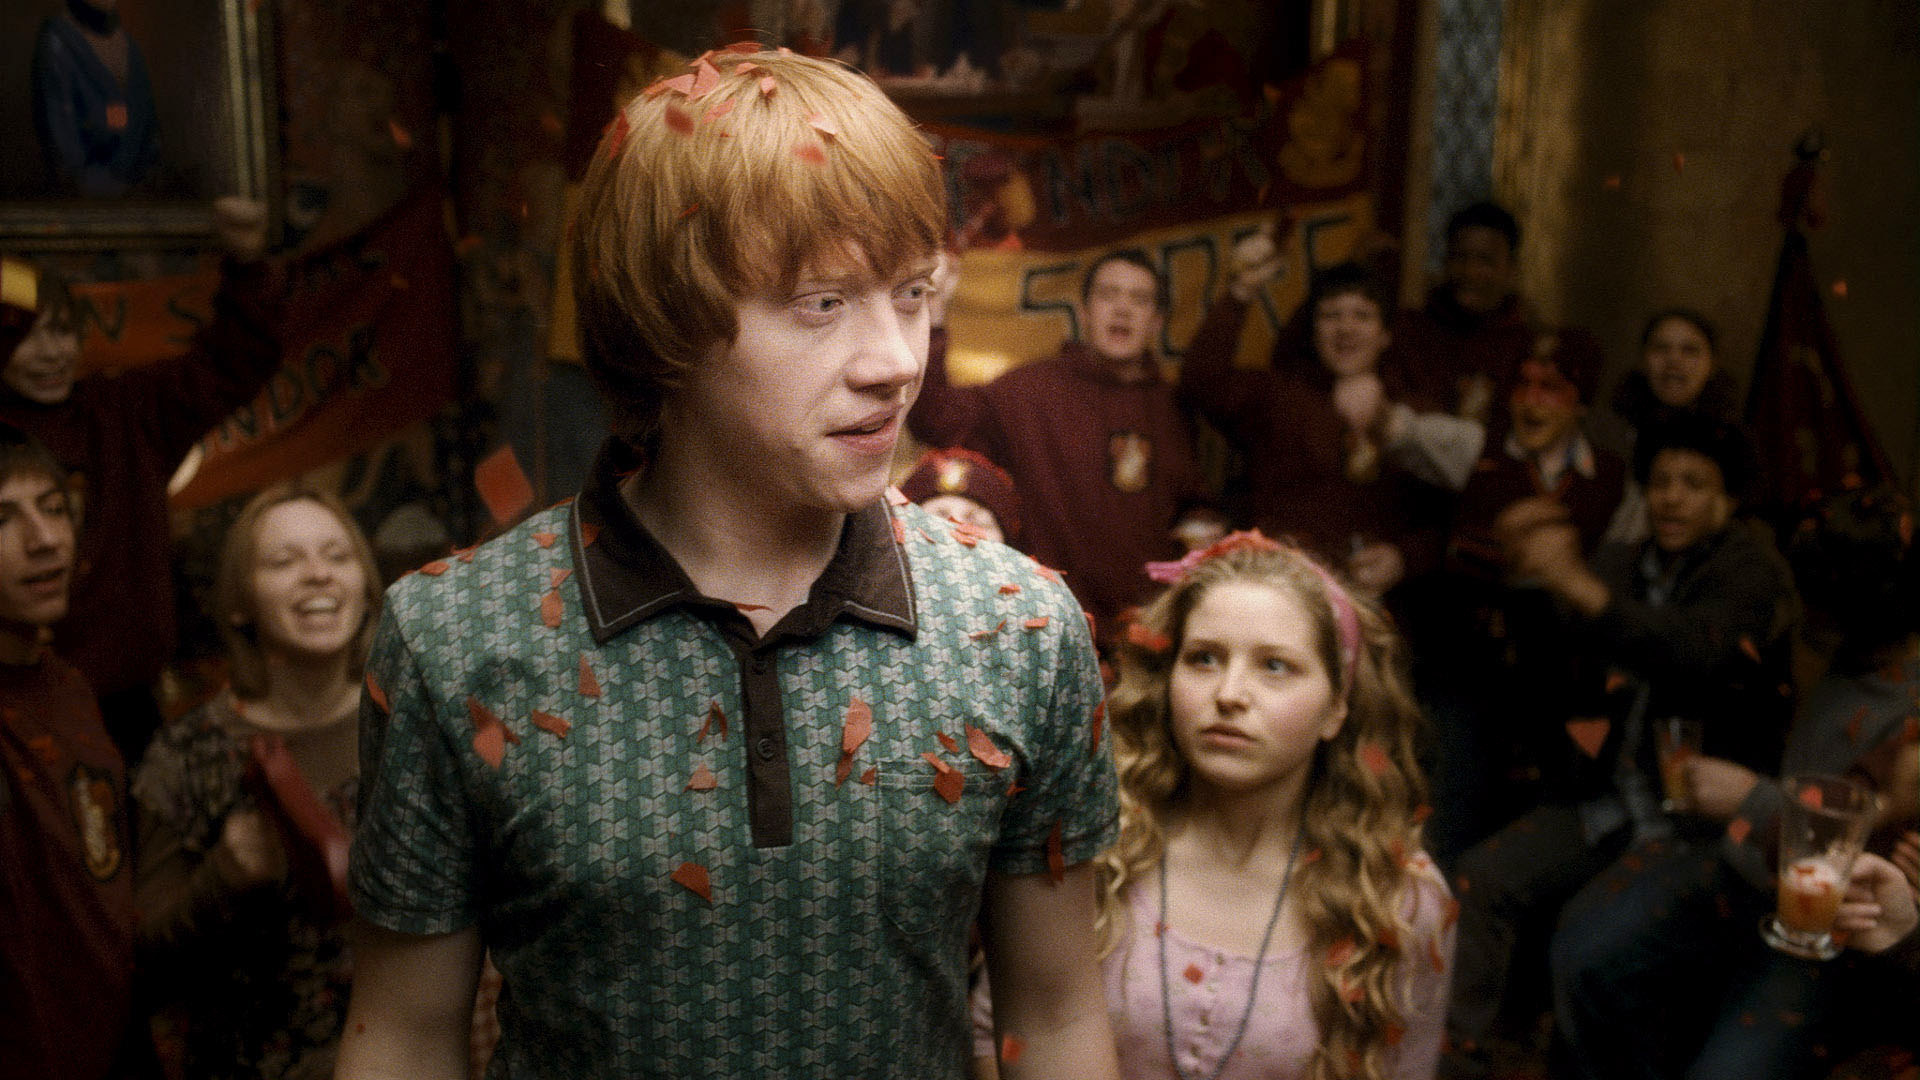 Ron Weasley stands in the foreground as Lavender Brown looks at him